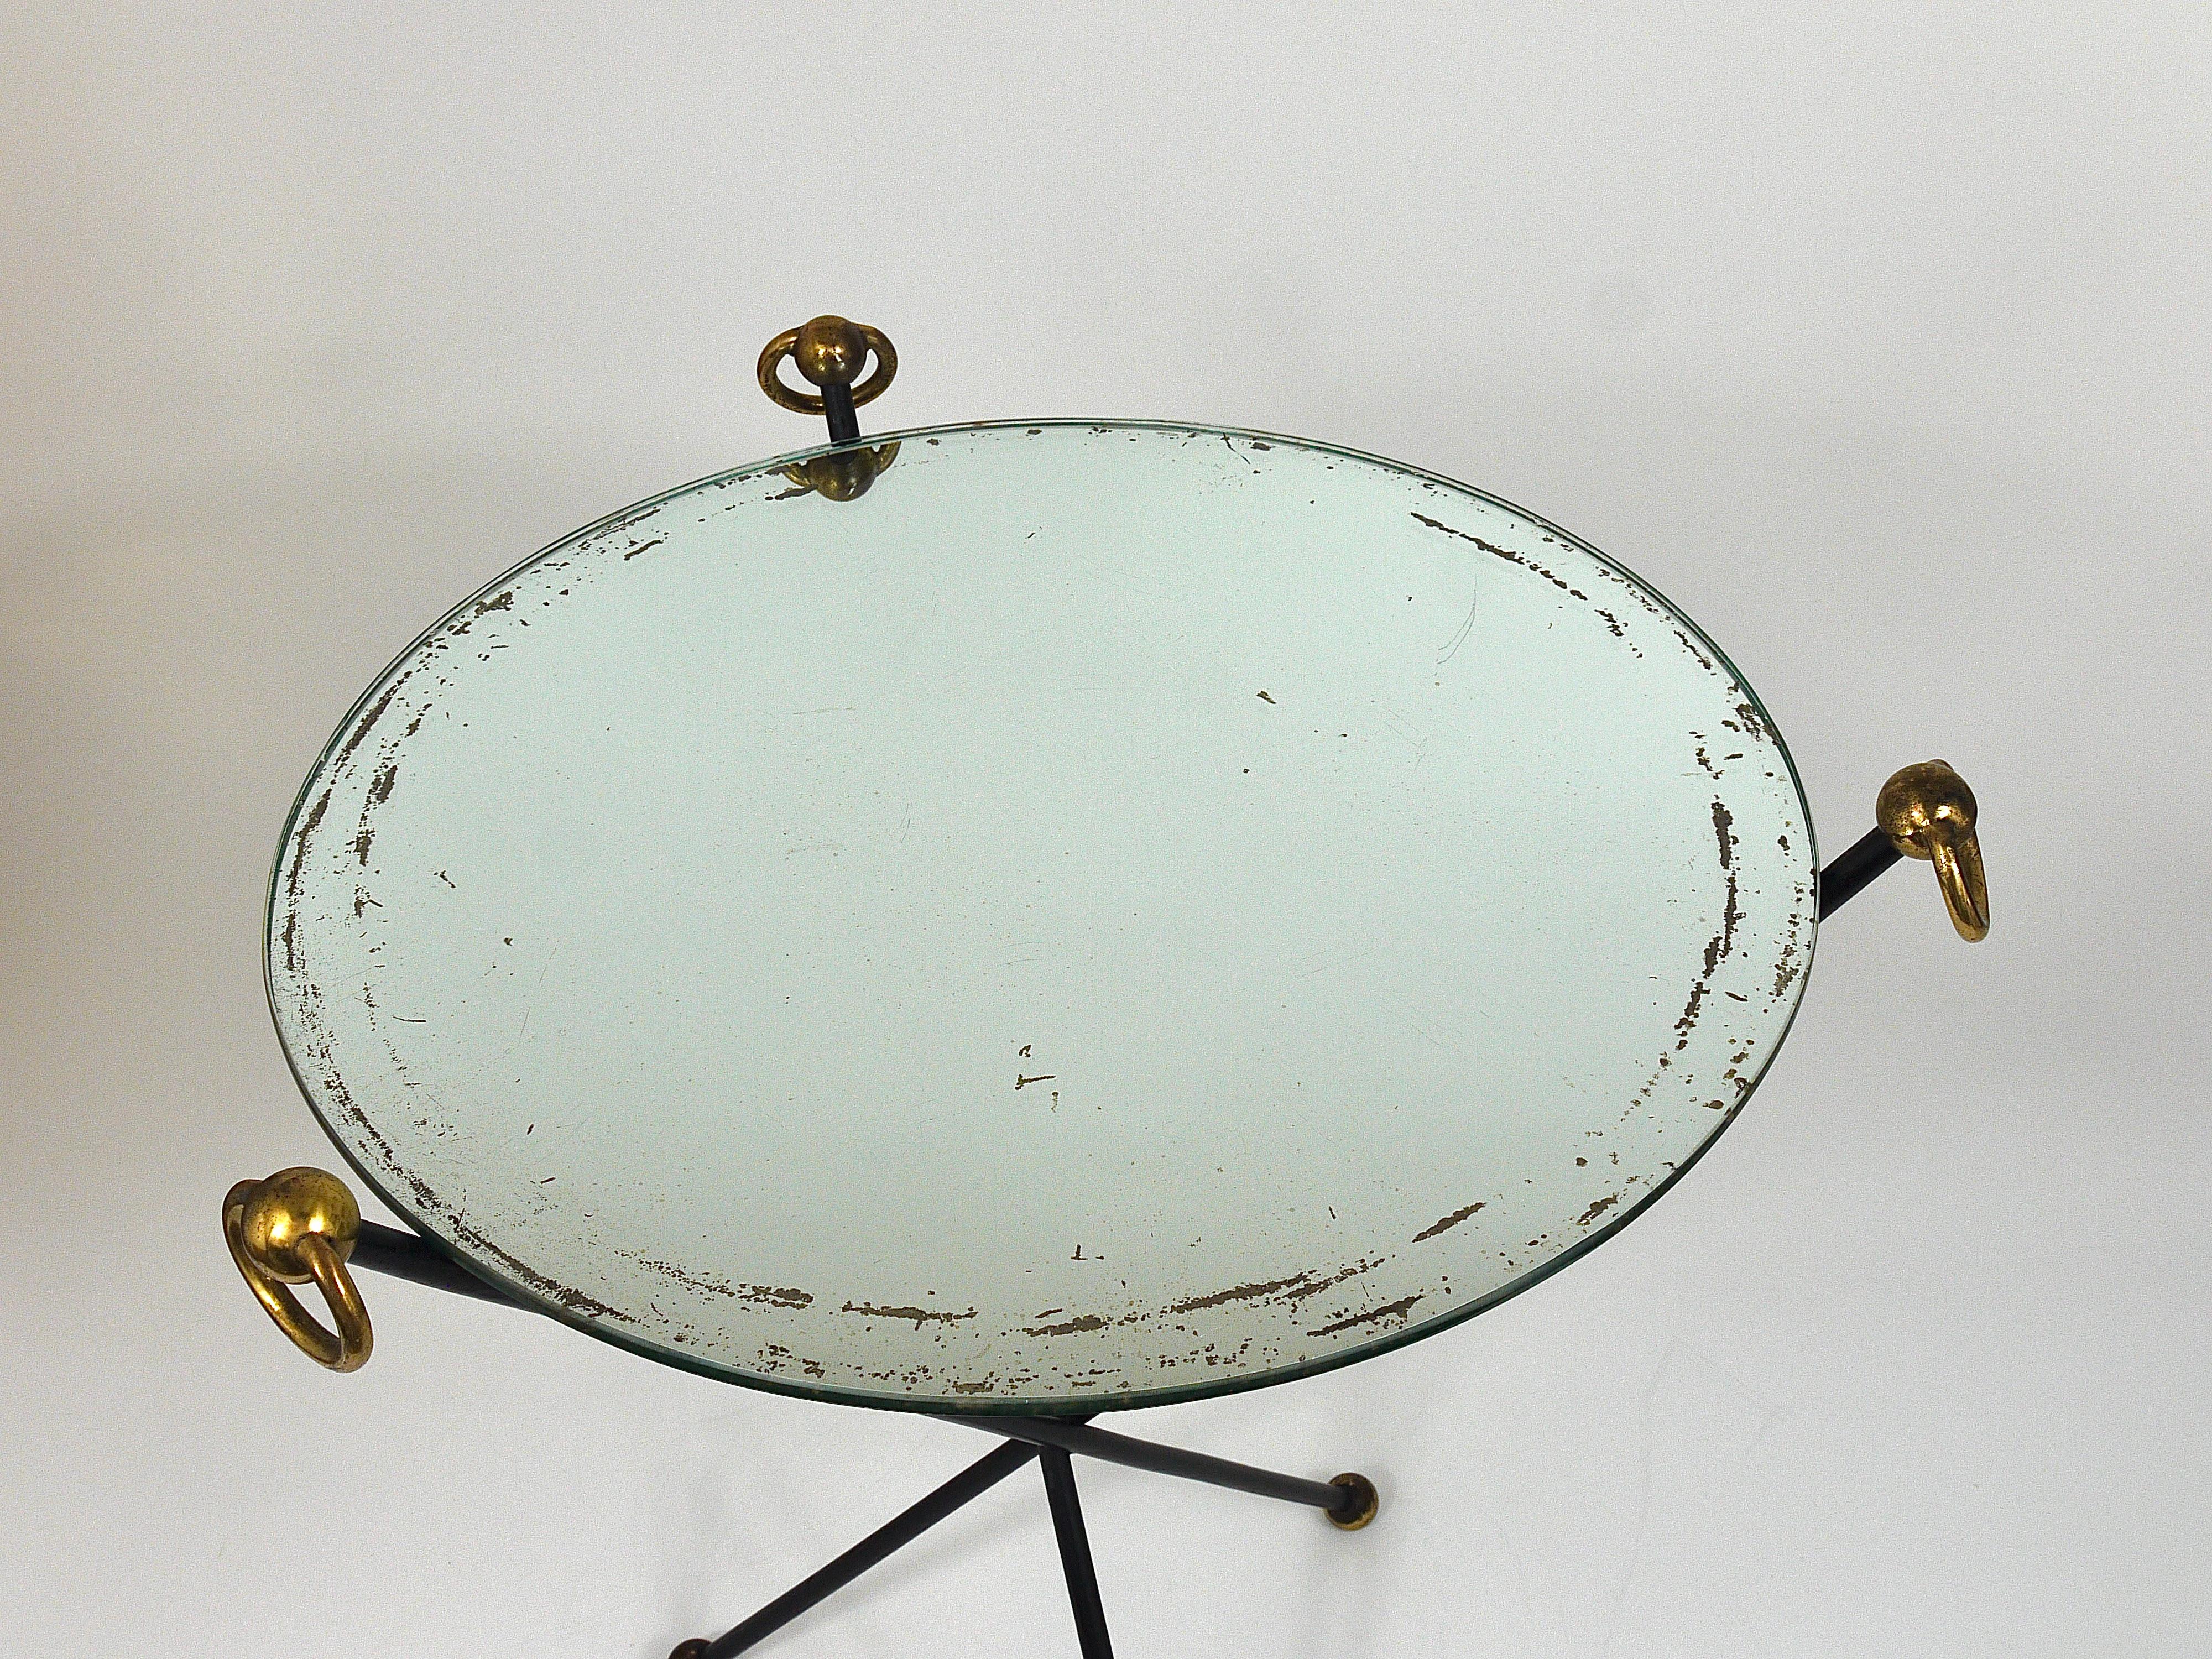 French Mid-Century Modern Mirror Side Table, Jacques Adnet Style, Brass, 1950s For Sale 1